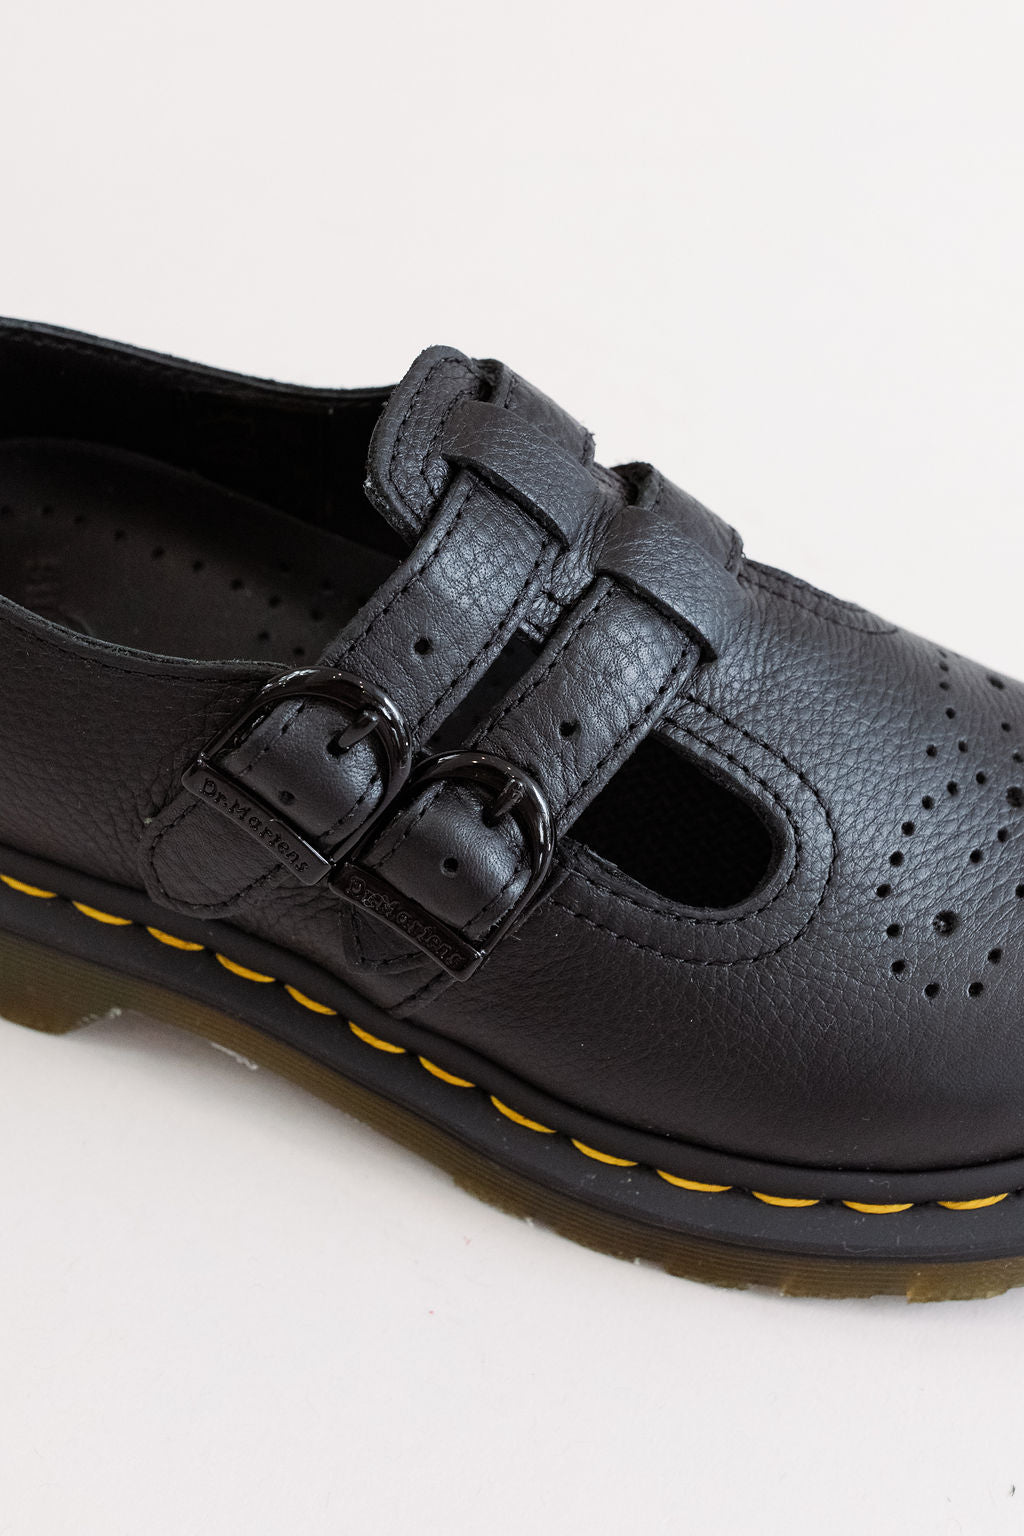 Dr. Martens |  8065 Virginia Leather Mary Jane | Black - Poppy and Stella